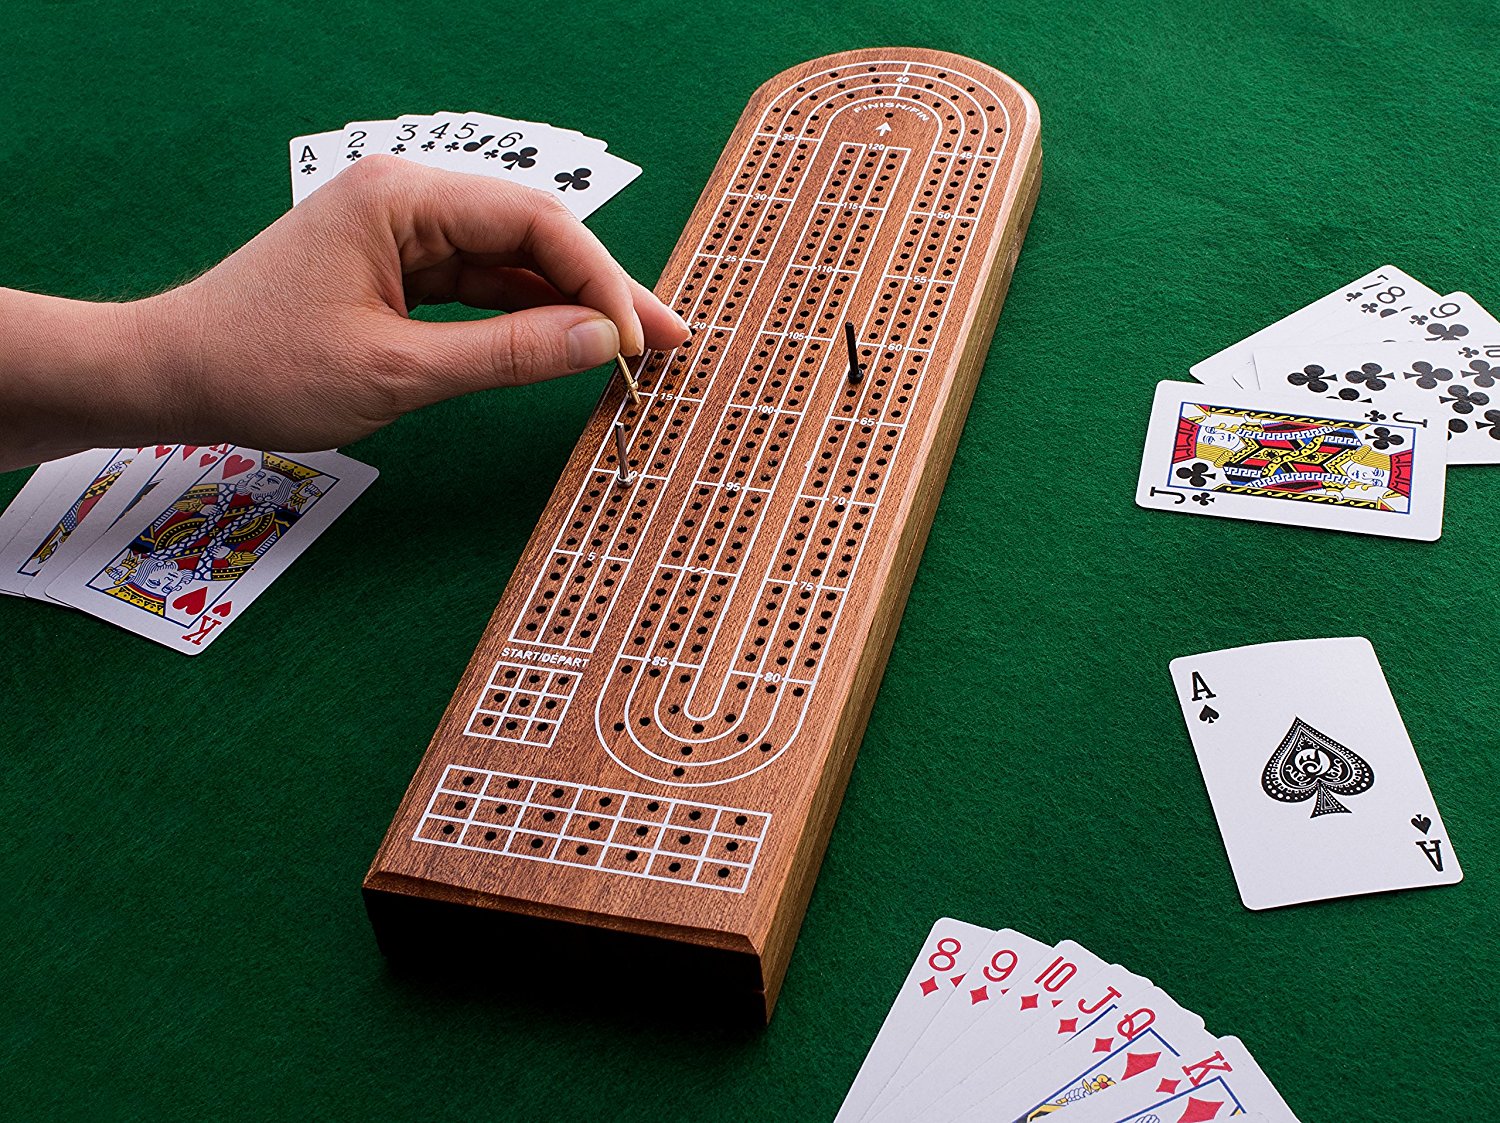 Cribbage on Wednesday's at 1 p.m.